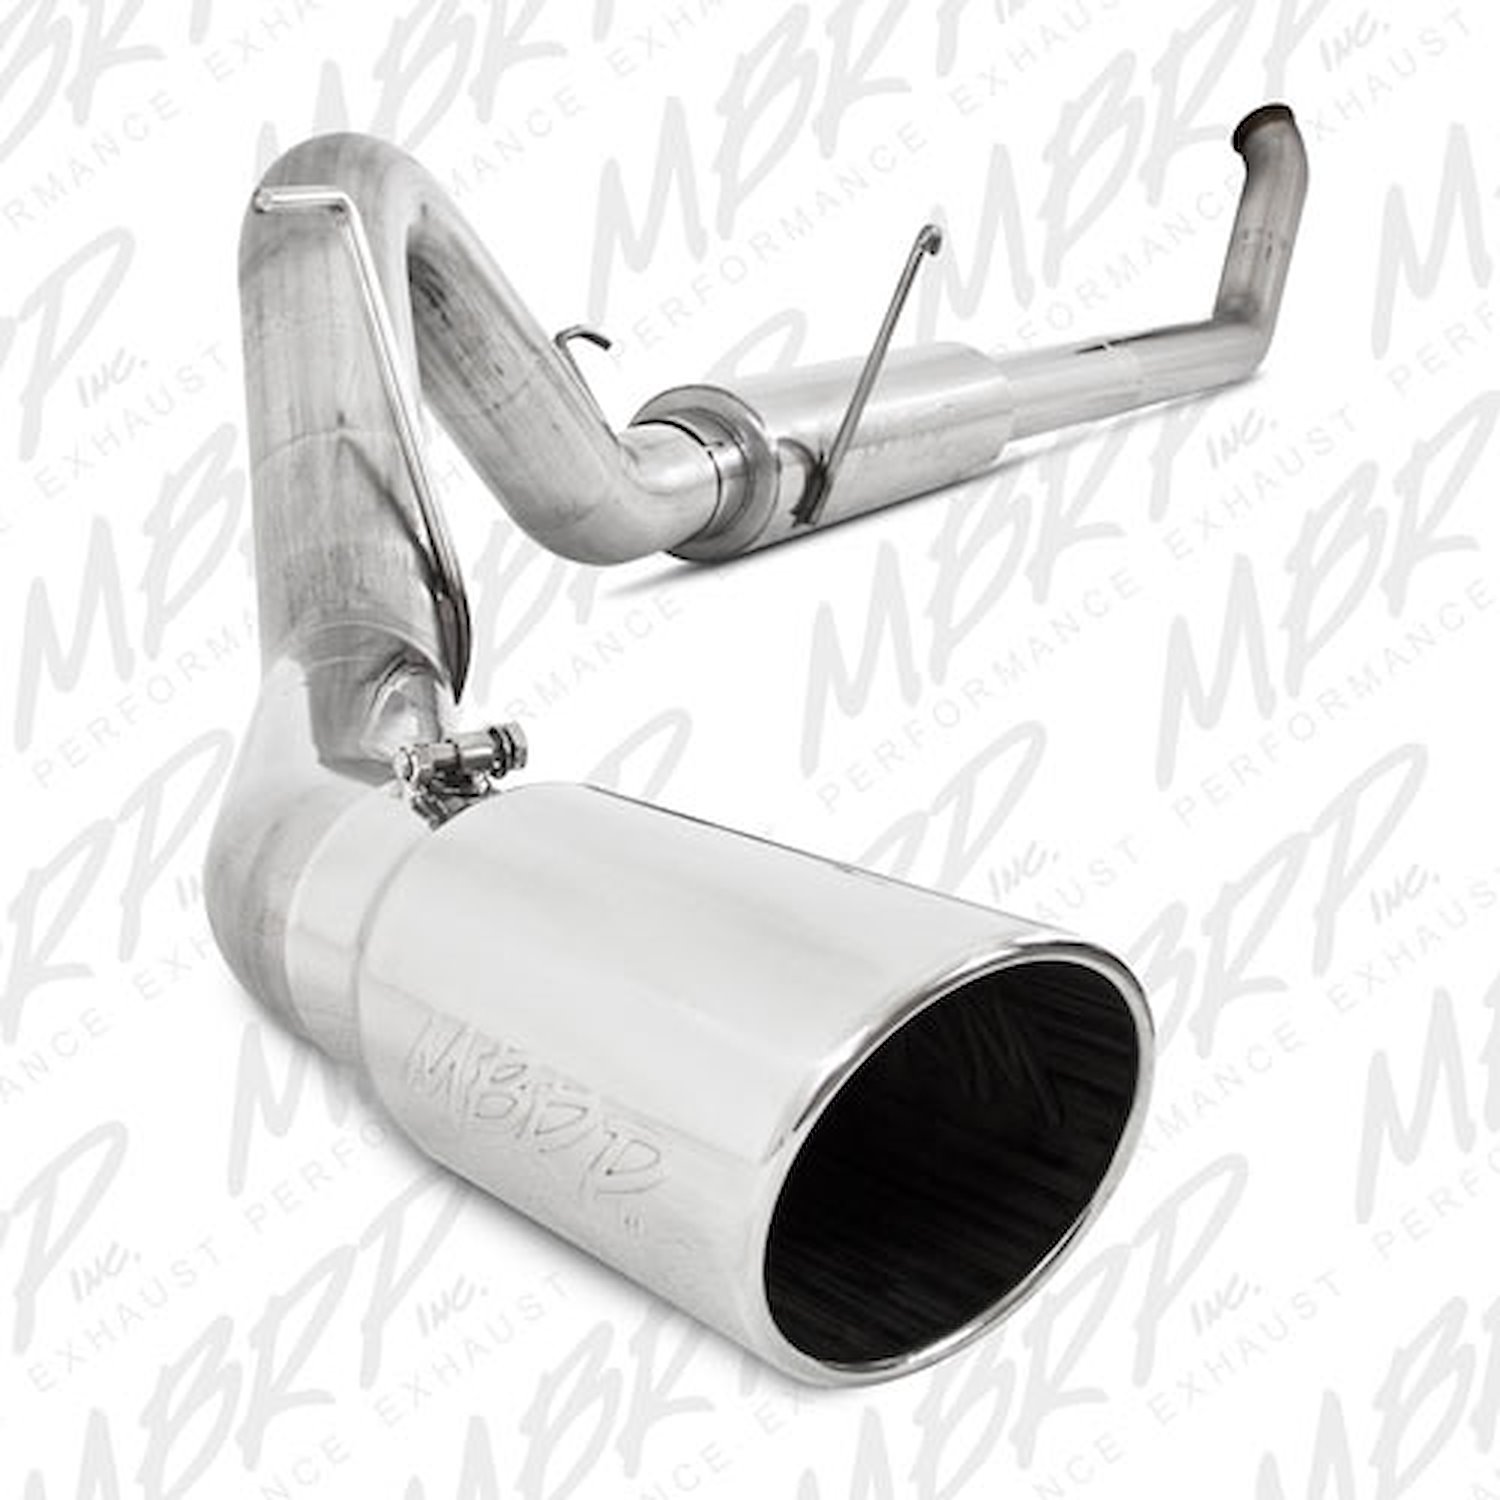 XP Series Exhaust System 2003-04 Dodge 2500/3500 4WD for Cummins